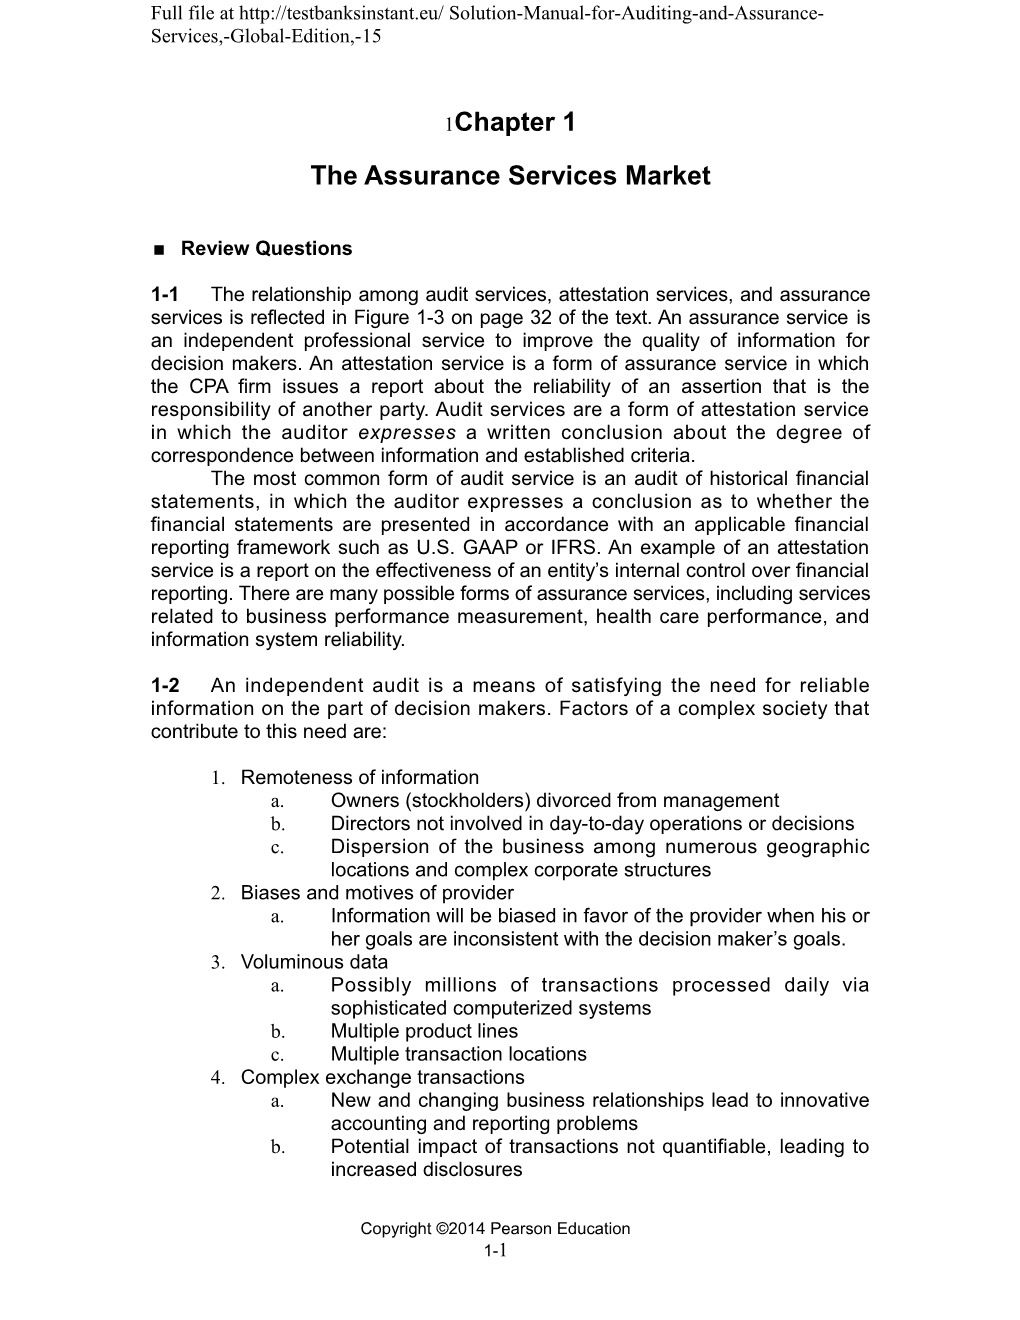 Full File at Solution-Manual-For-Auditing-And-Assurance-Services,-Global-Edition,-15